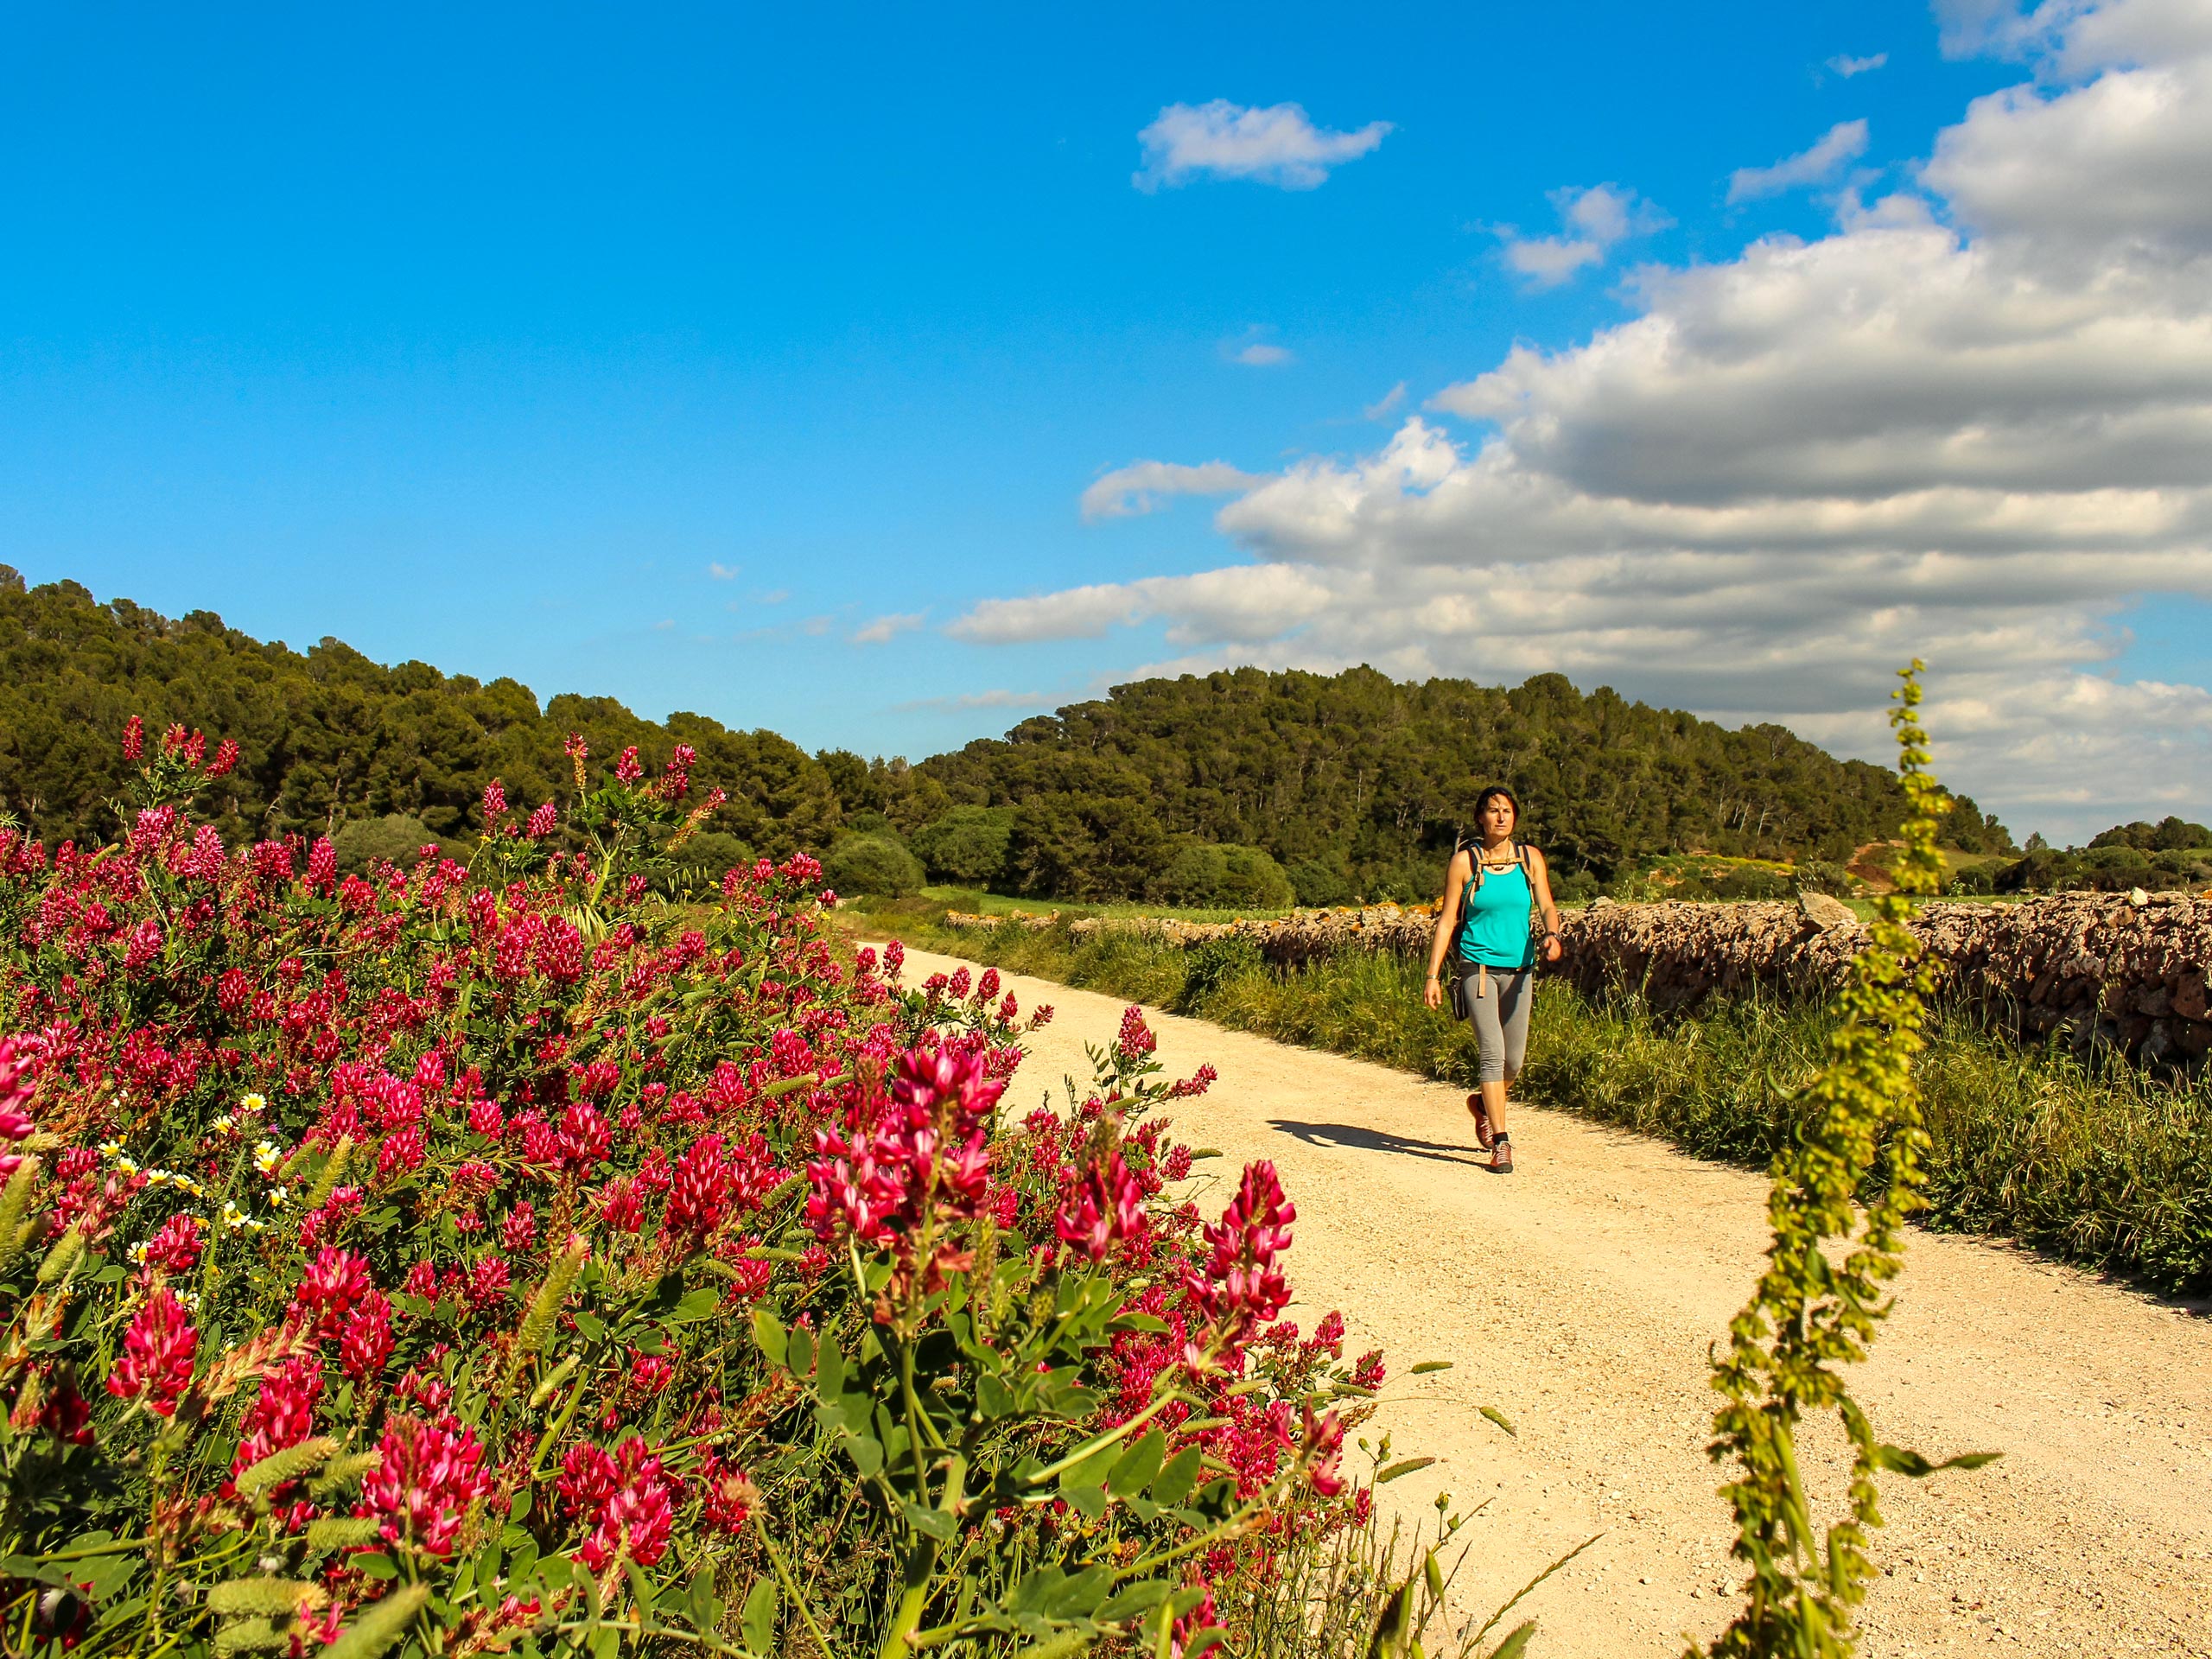 Hiker tourist walking down path lined with flowers walking tour Menorca Spain